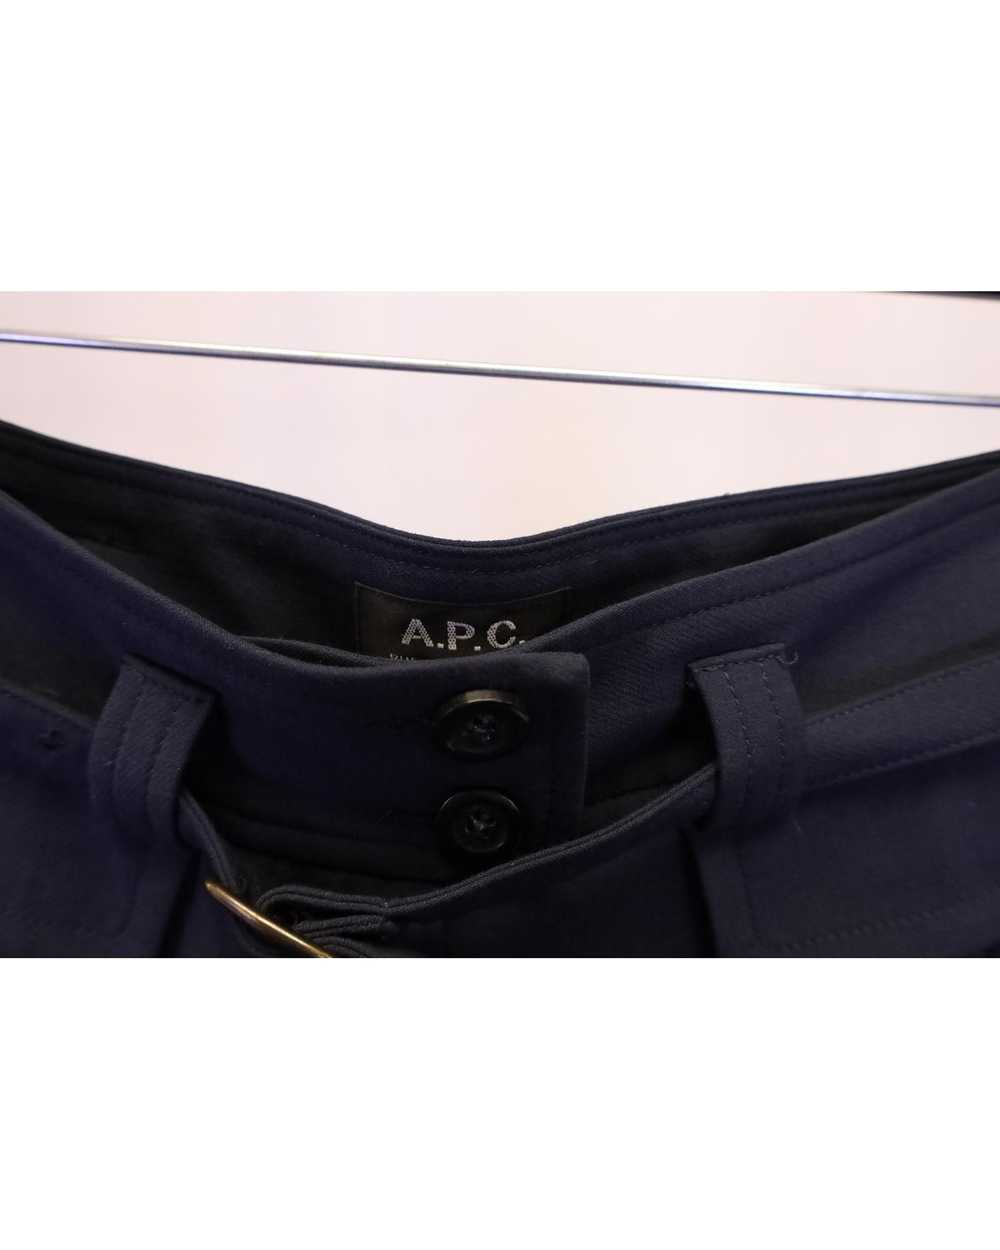 A.P.C. Navy Blue Wool Belted Pleated Trousers APC - image 4